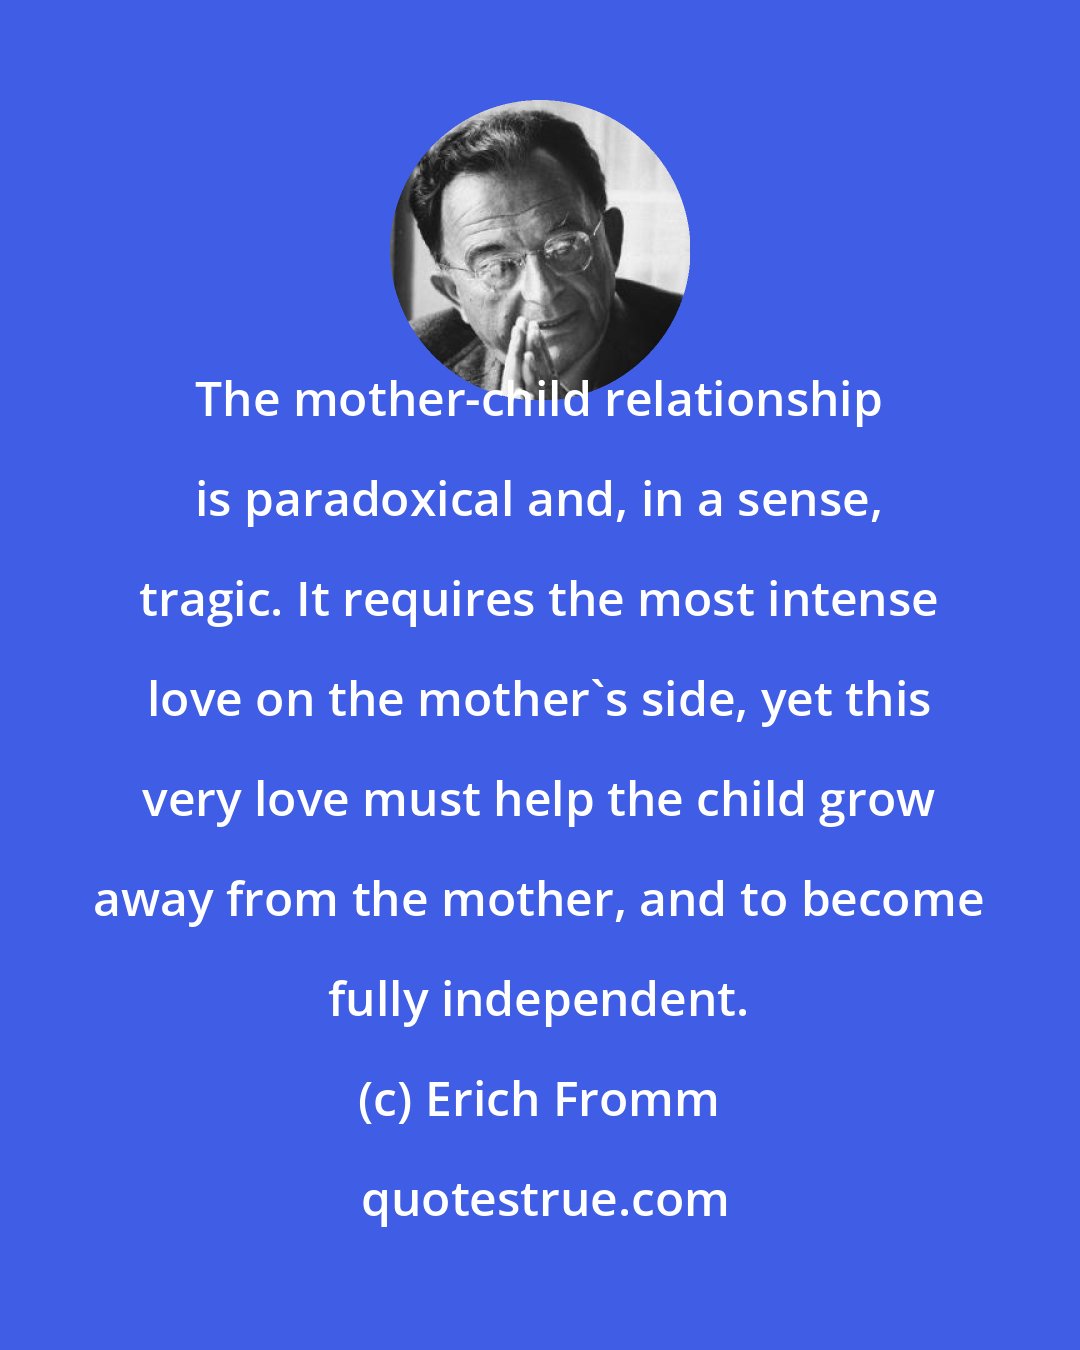 Erich Fromm: The mother-child relationship is paradoxical and, in a sense, tragic. It requires the most intense love on the mother's side, yet this very love must help the child grow away from the mother, and to become fully independent.